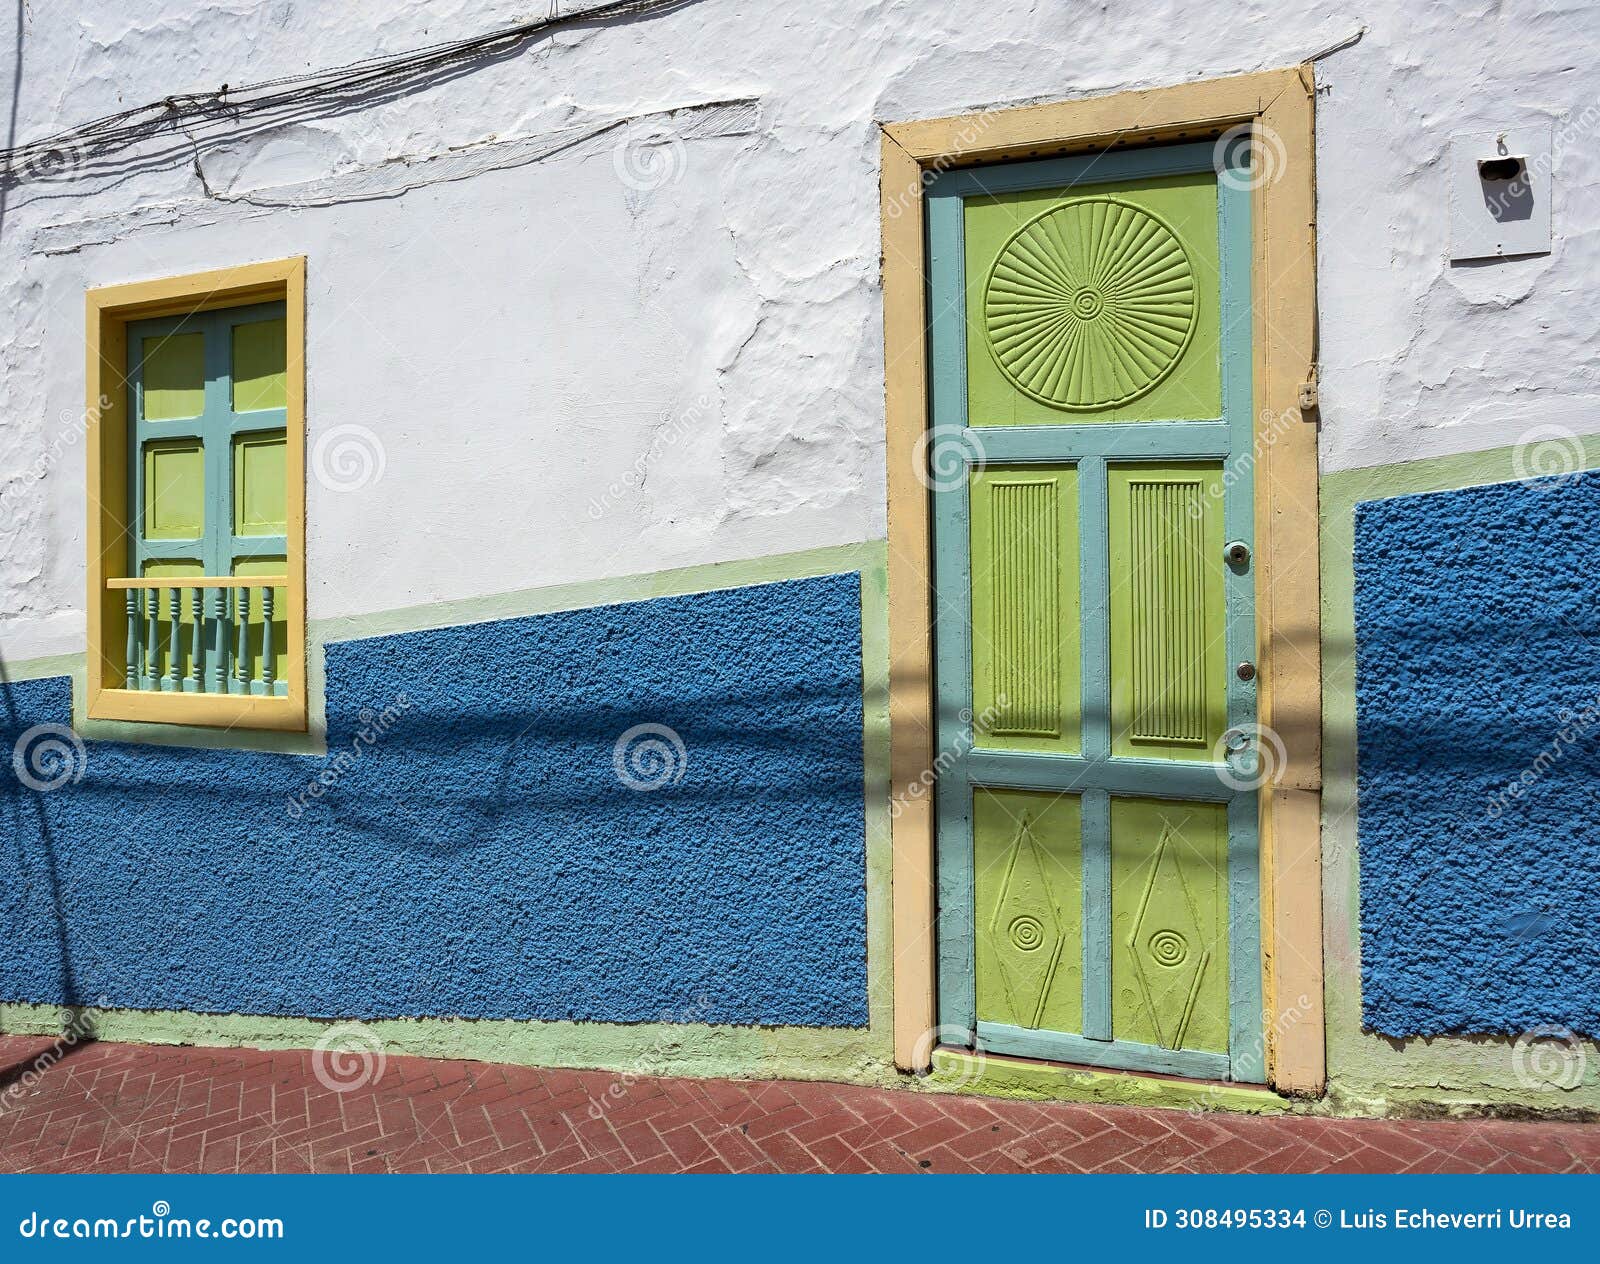 ciudad bolivar, antioquia - colombia. february 21, 2024. traditional colombian architecture, white facade with green doors and